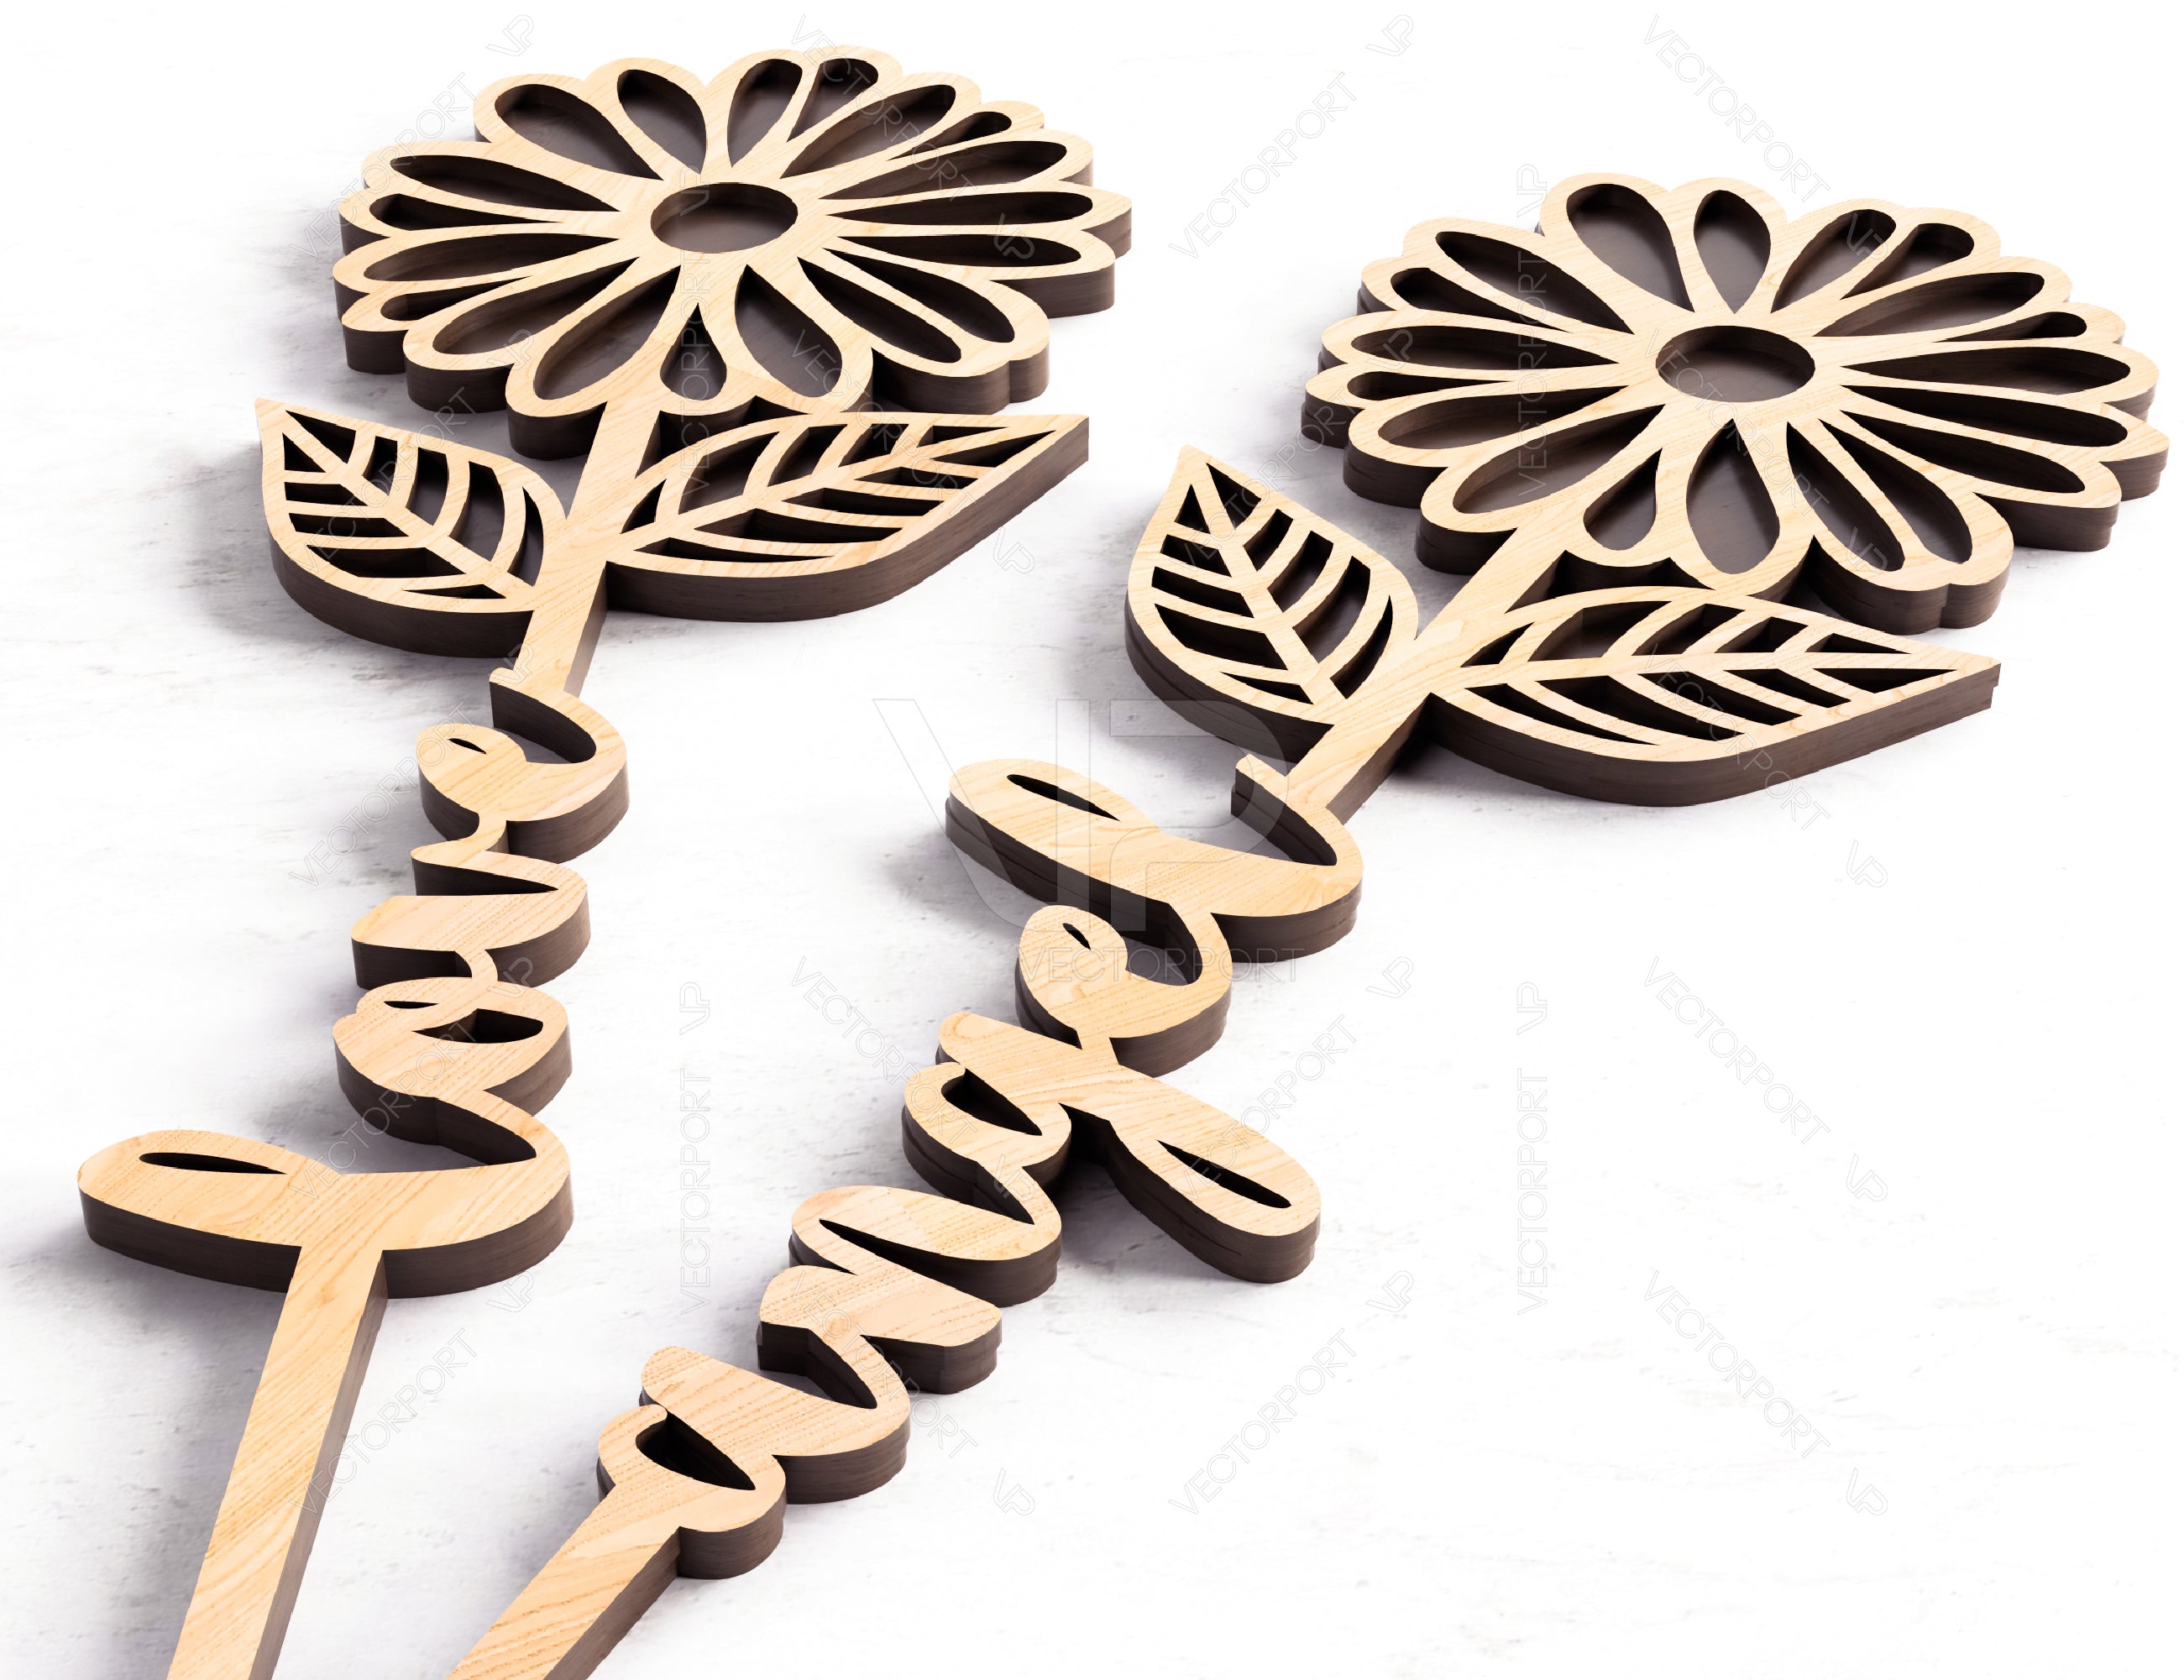 Daisy - Laser Personalized Cut Out Art Valentine Day Acrylic wood Flower with name editable Cut Files |#U033|